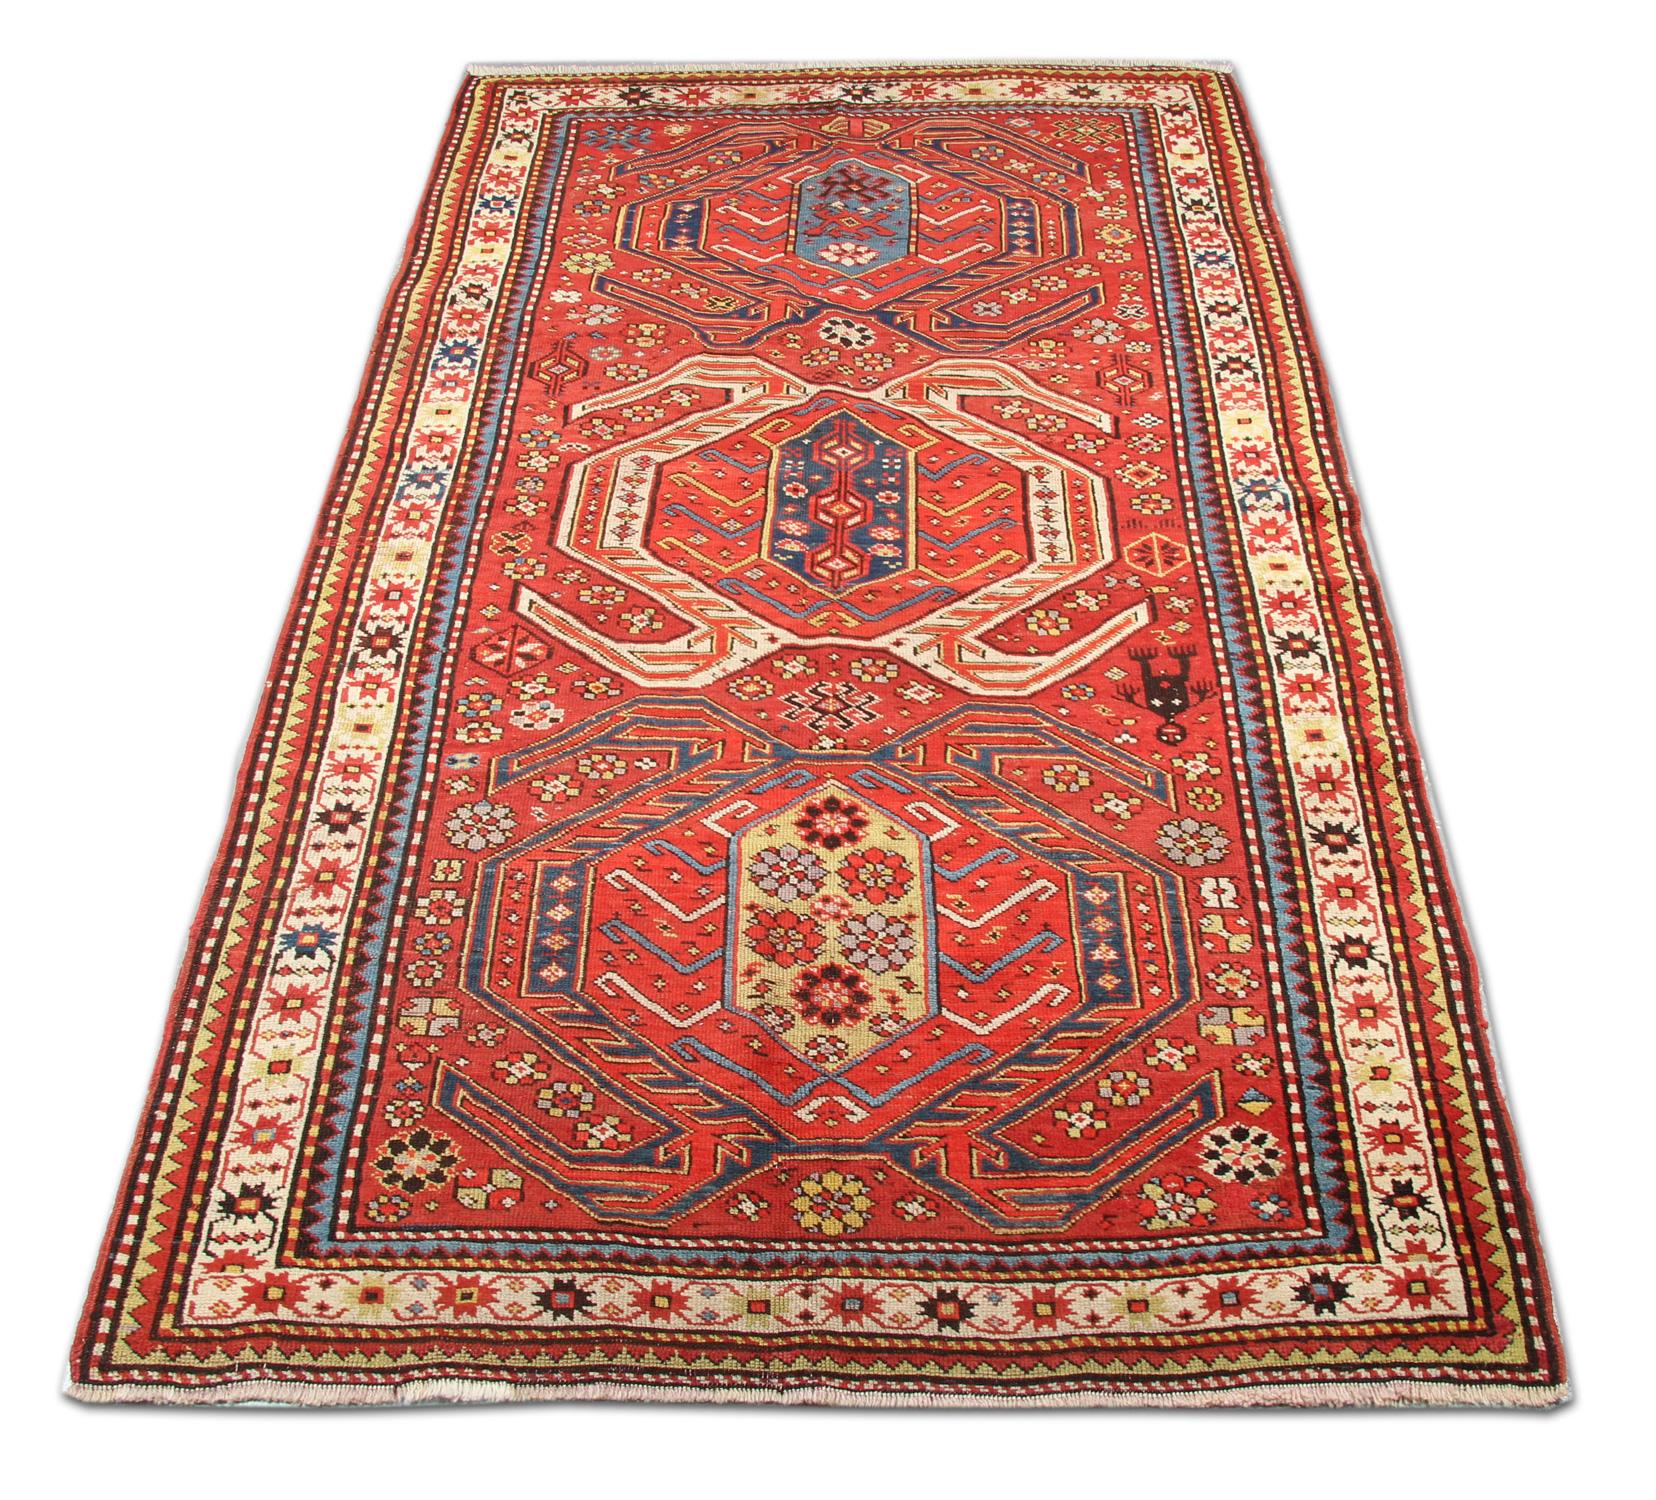 This unique handwoven Lankaran wool rug has been woven with three highly decorative tribal motif medallions on a rich red background with cream, blue and green accents. This piece's colour and design make it the perfect accent rug for any home